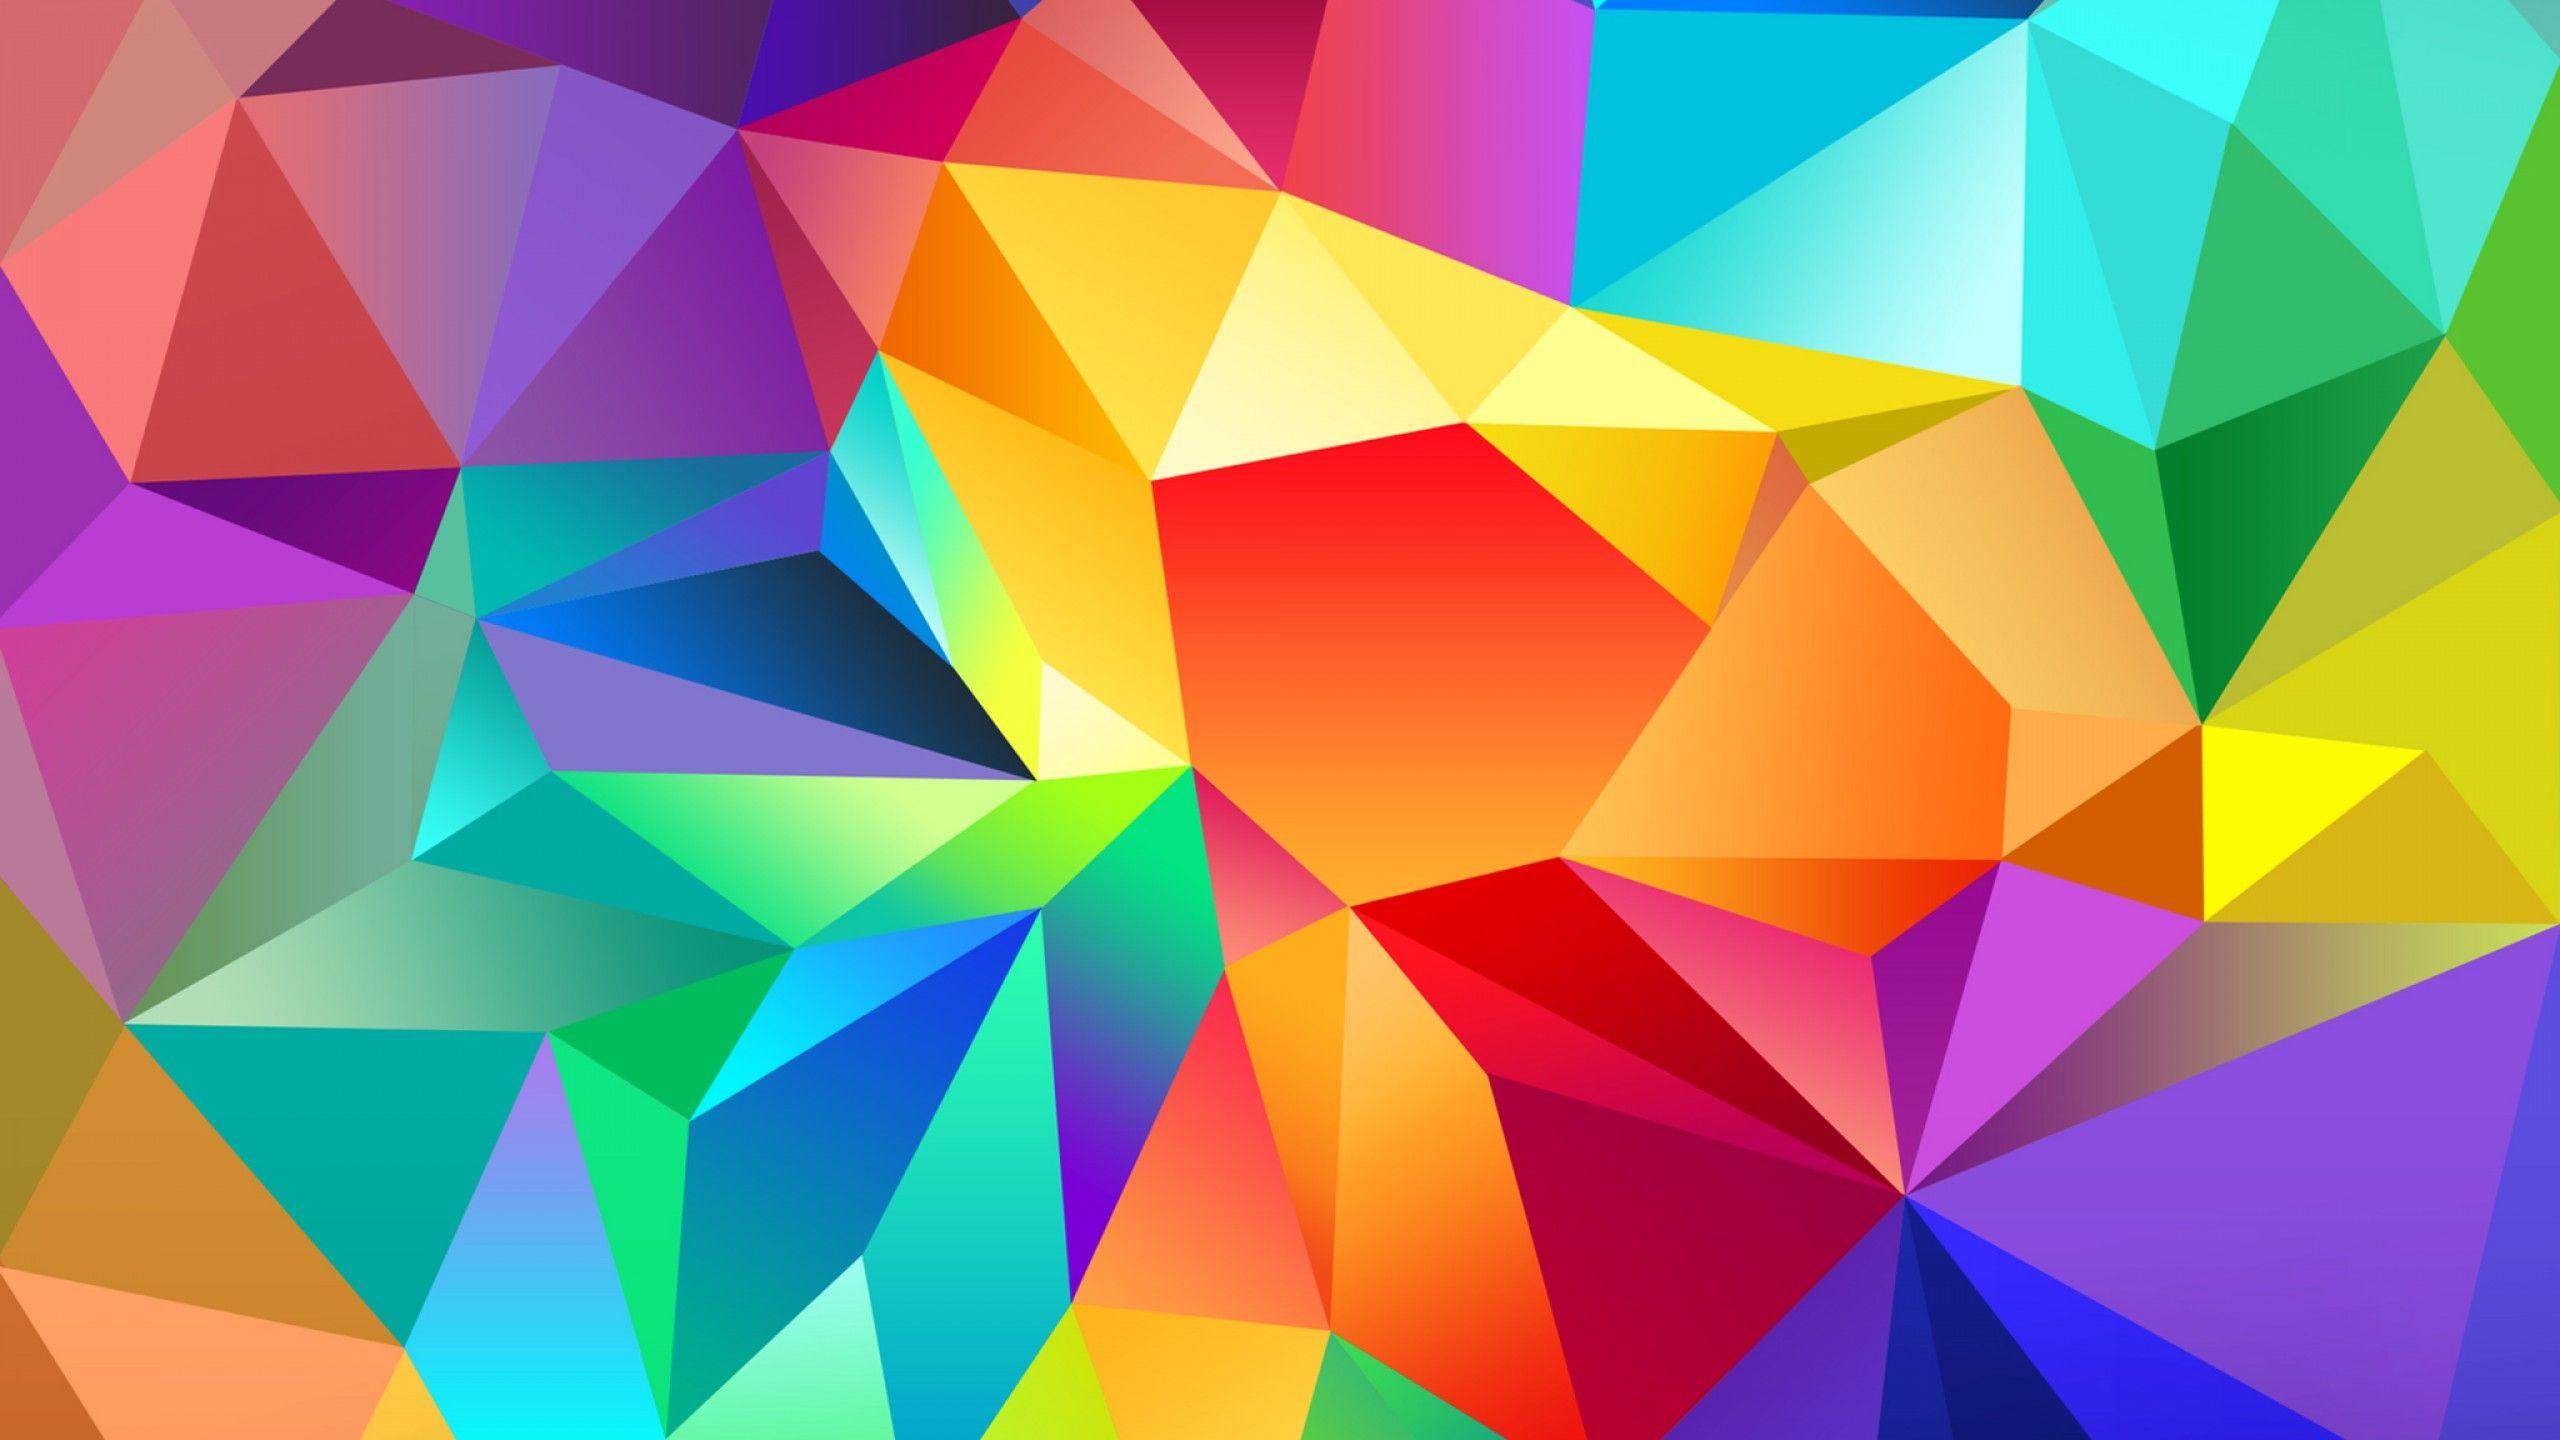 Rainbow Polygon Wallpapers - Top Free Rainbow Polygon Backgrounds